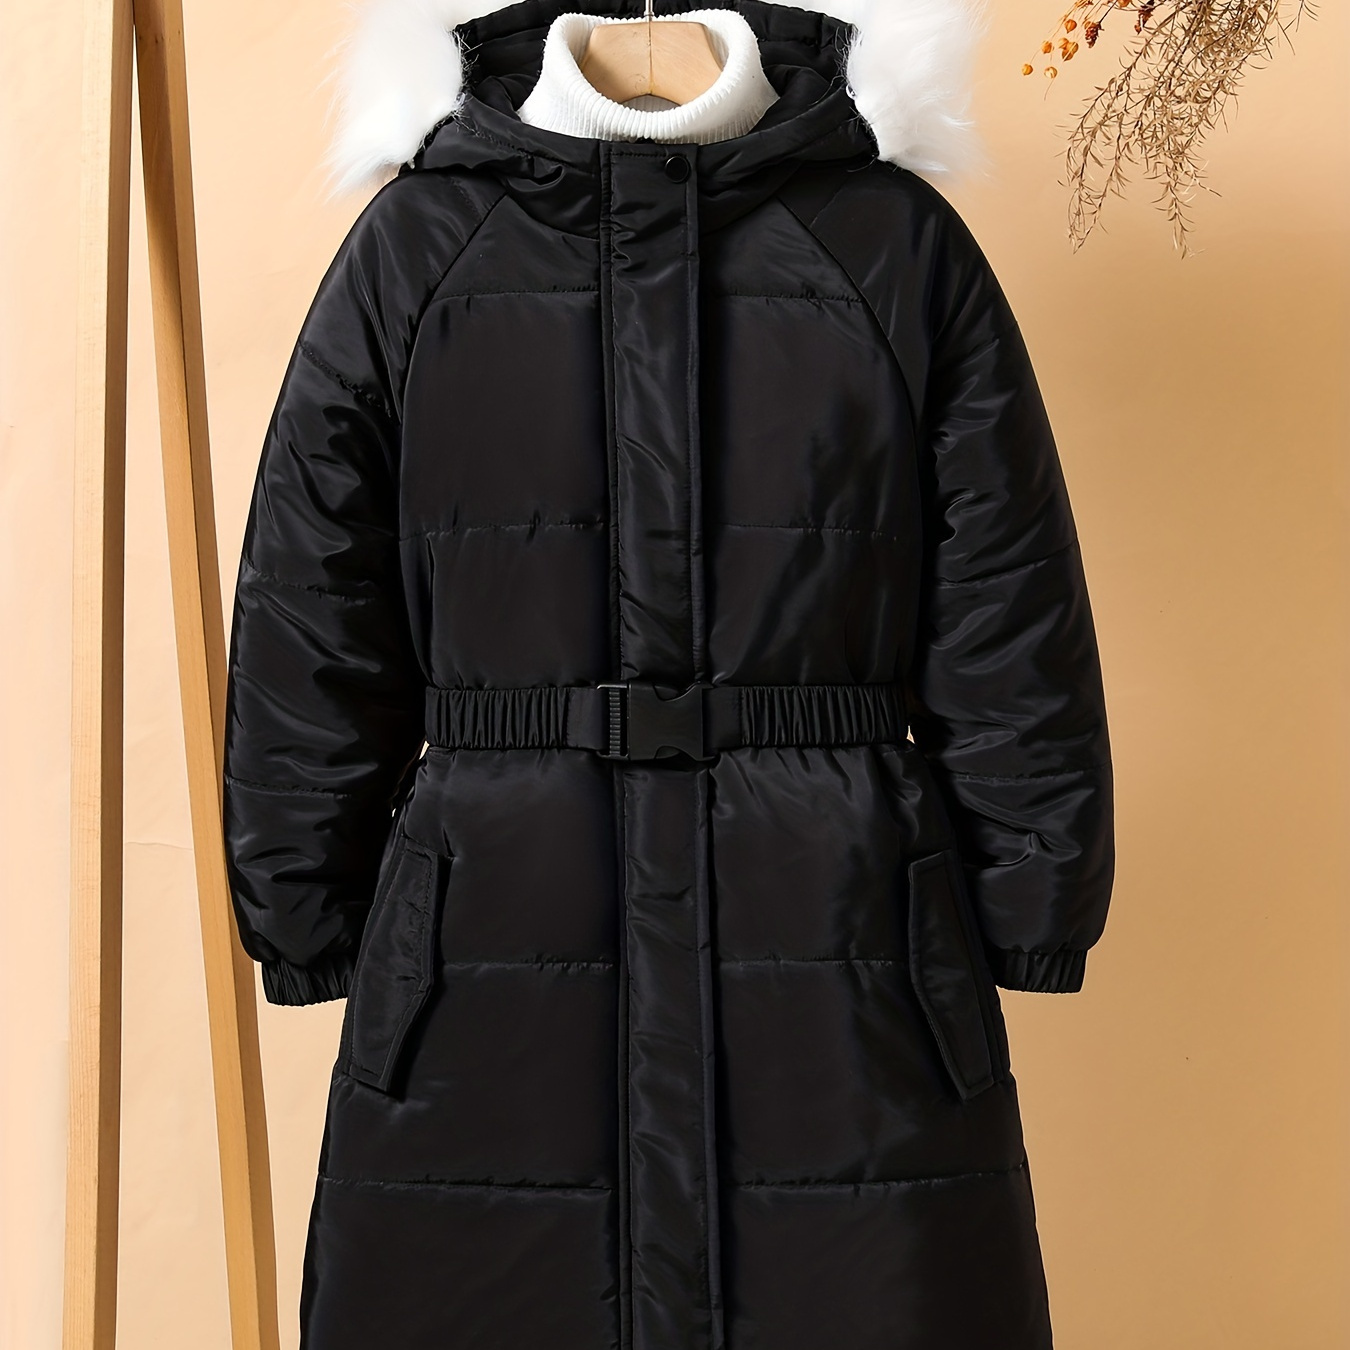 

Girls Longline Cotton-padded Snow Suit Jacket With Hooded Fur Collar & Belt For Winter Outerwear